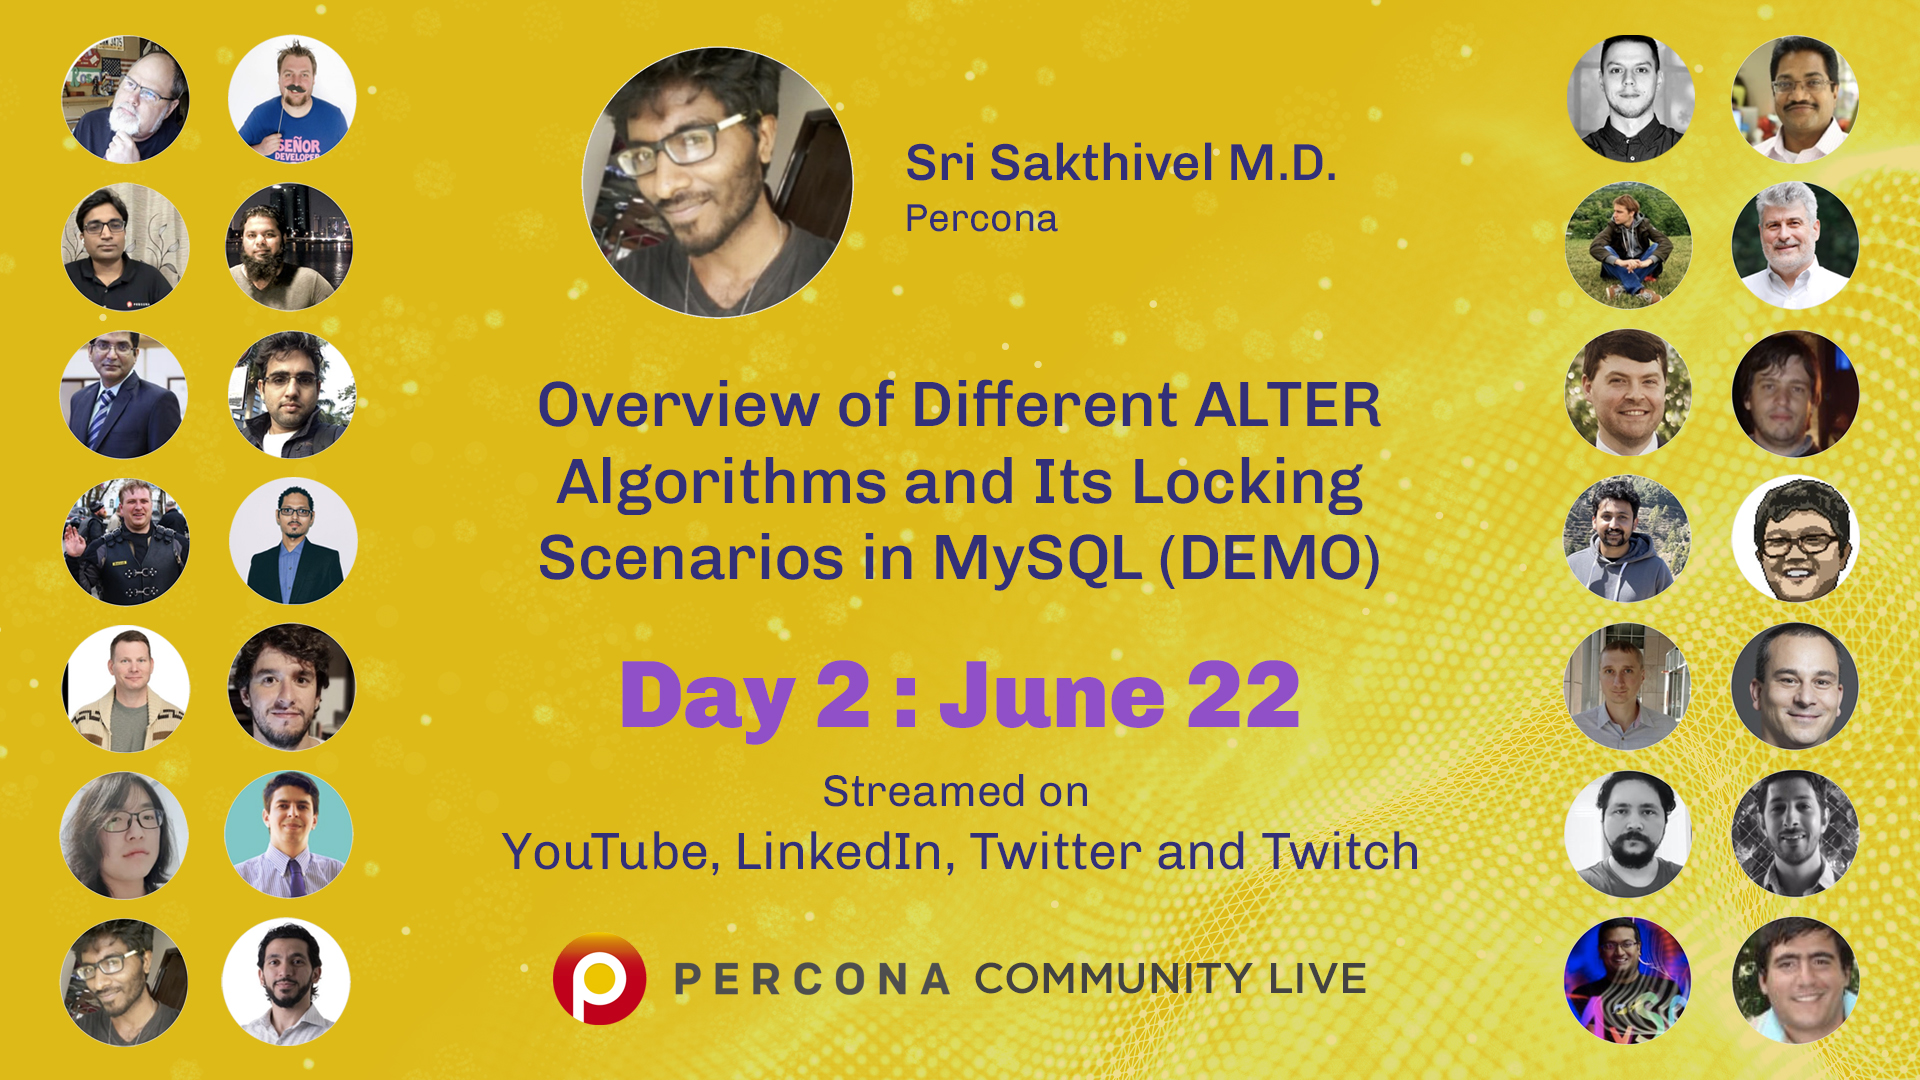 Overview of Different ALTER Algorithms and Its Locking Scenarios in MySQL DEMO